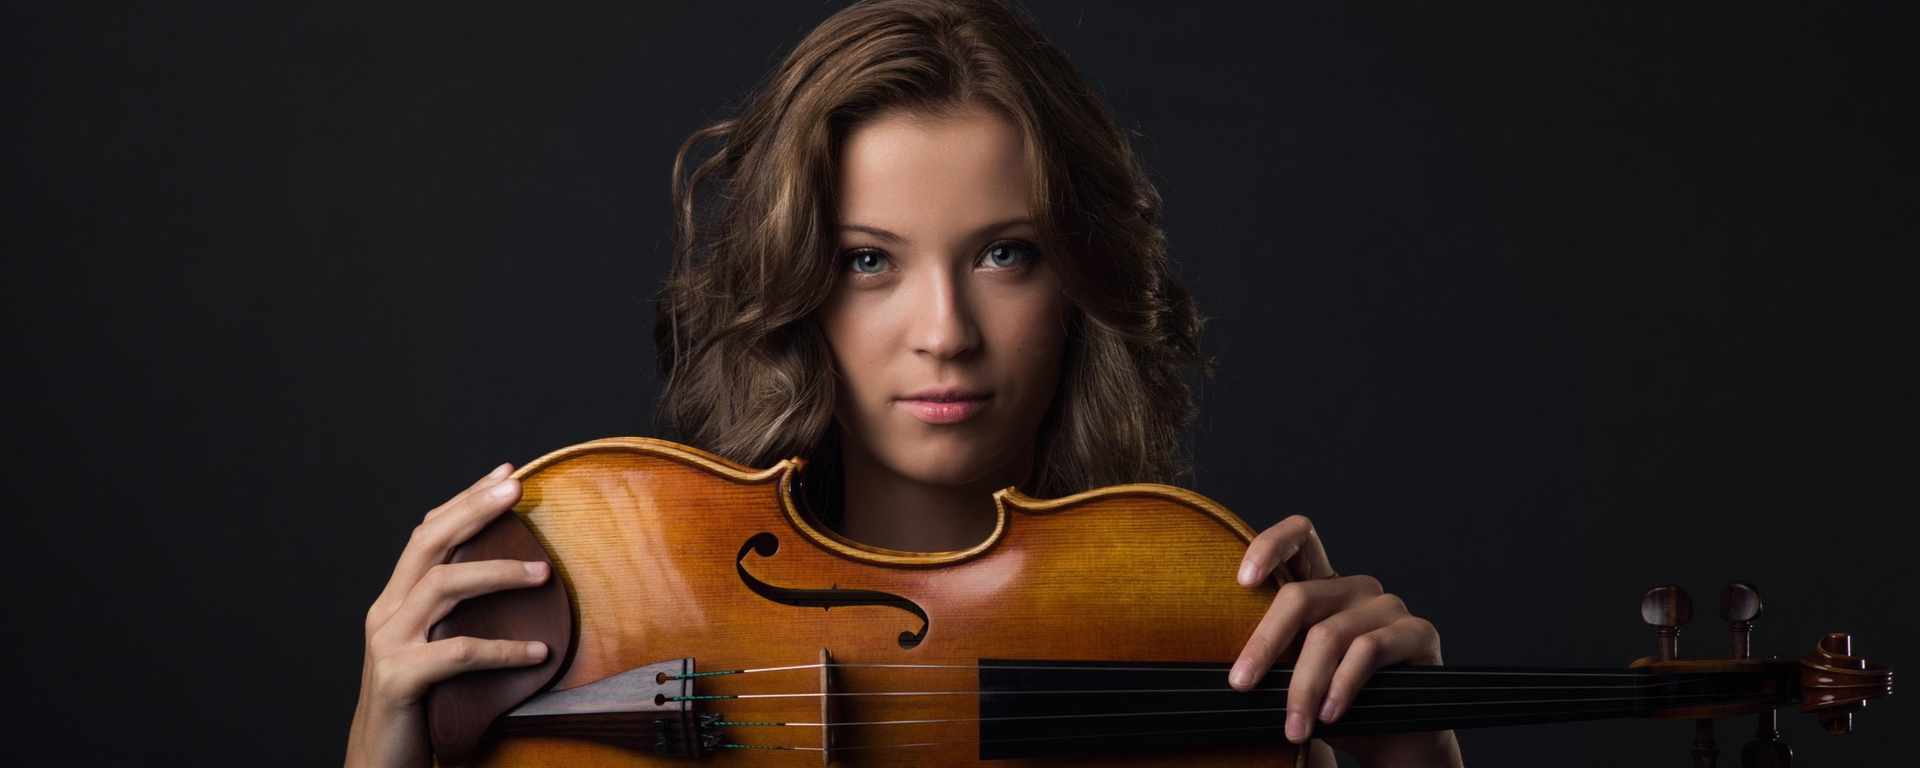 Violin lessons for children ages 5-16- Beginners 